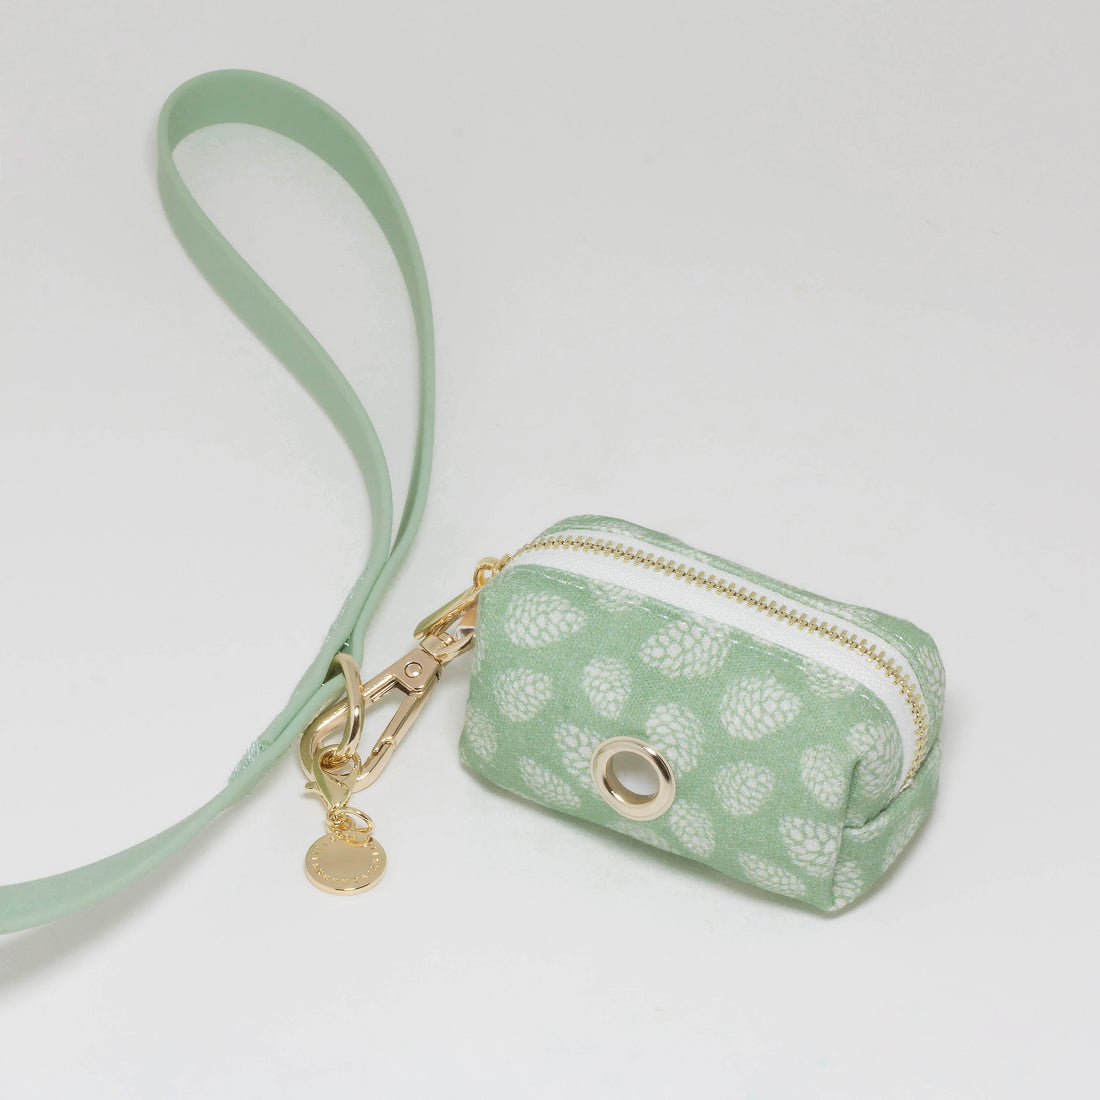 Pistachio Sage Green Waterproof Cloud Dog Leash | Lightweight PVC Leash | Odor Proof, Stink Proof, and Durable | Available in 3 Lengths 